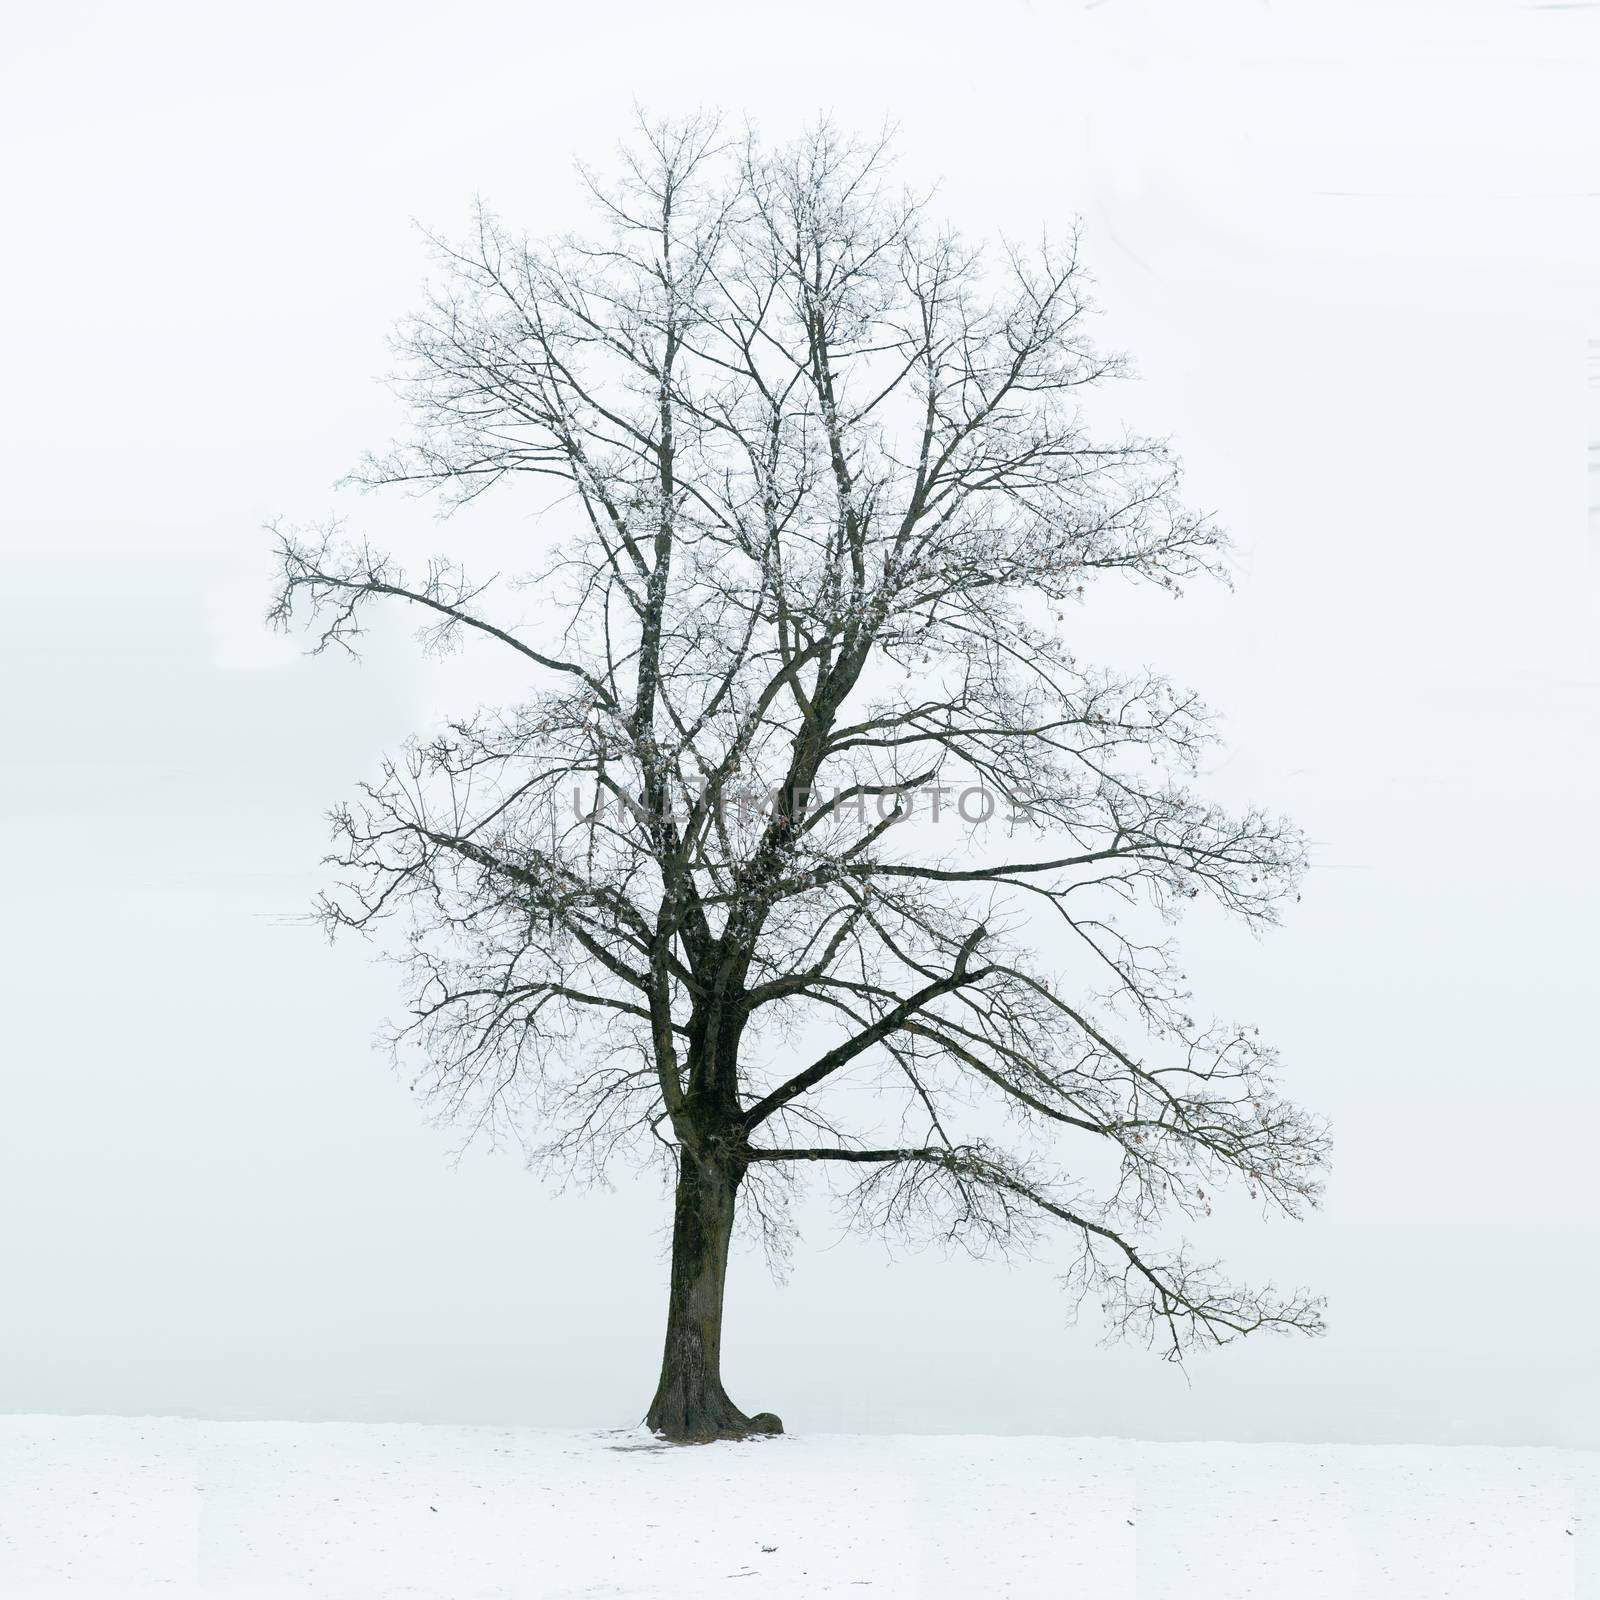 Lonely tree in winter as a symbol of loneliness, sadness and depression